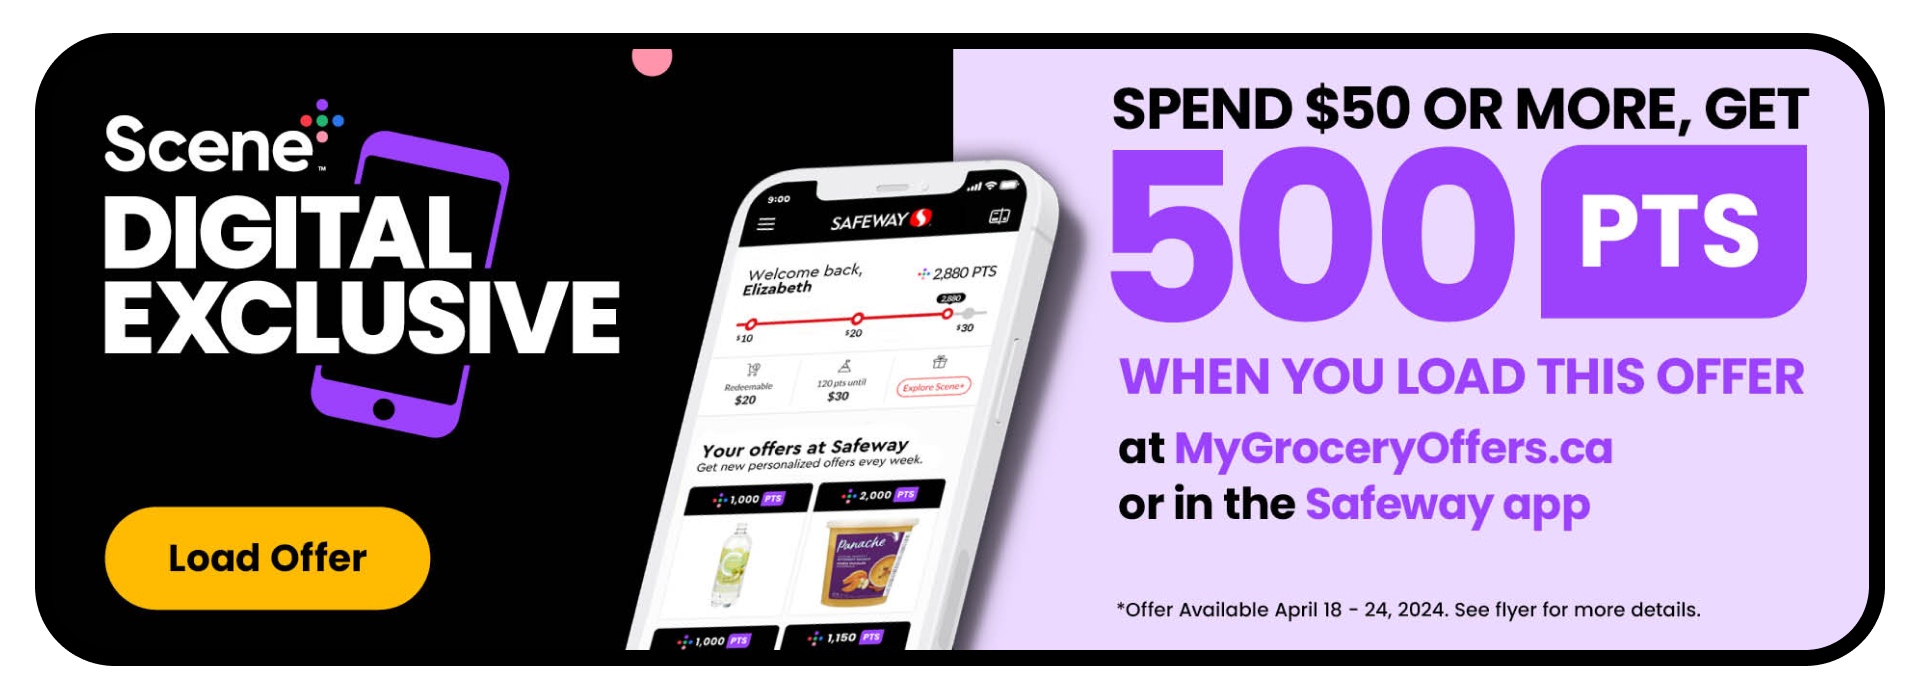 Scene+ Digital Exclusive! Load It to Get It! Spend $50 or more, get 500 PTS when you load this offer at MyGroceryOffers.ca or in the Safeway App. See flyer for more details